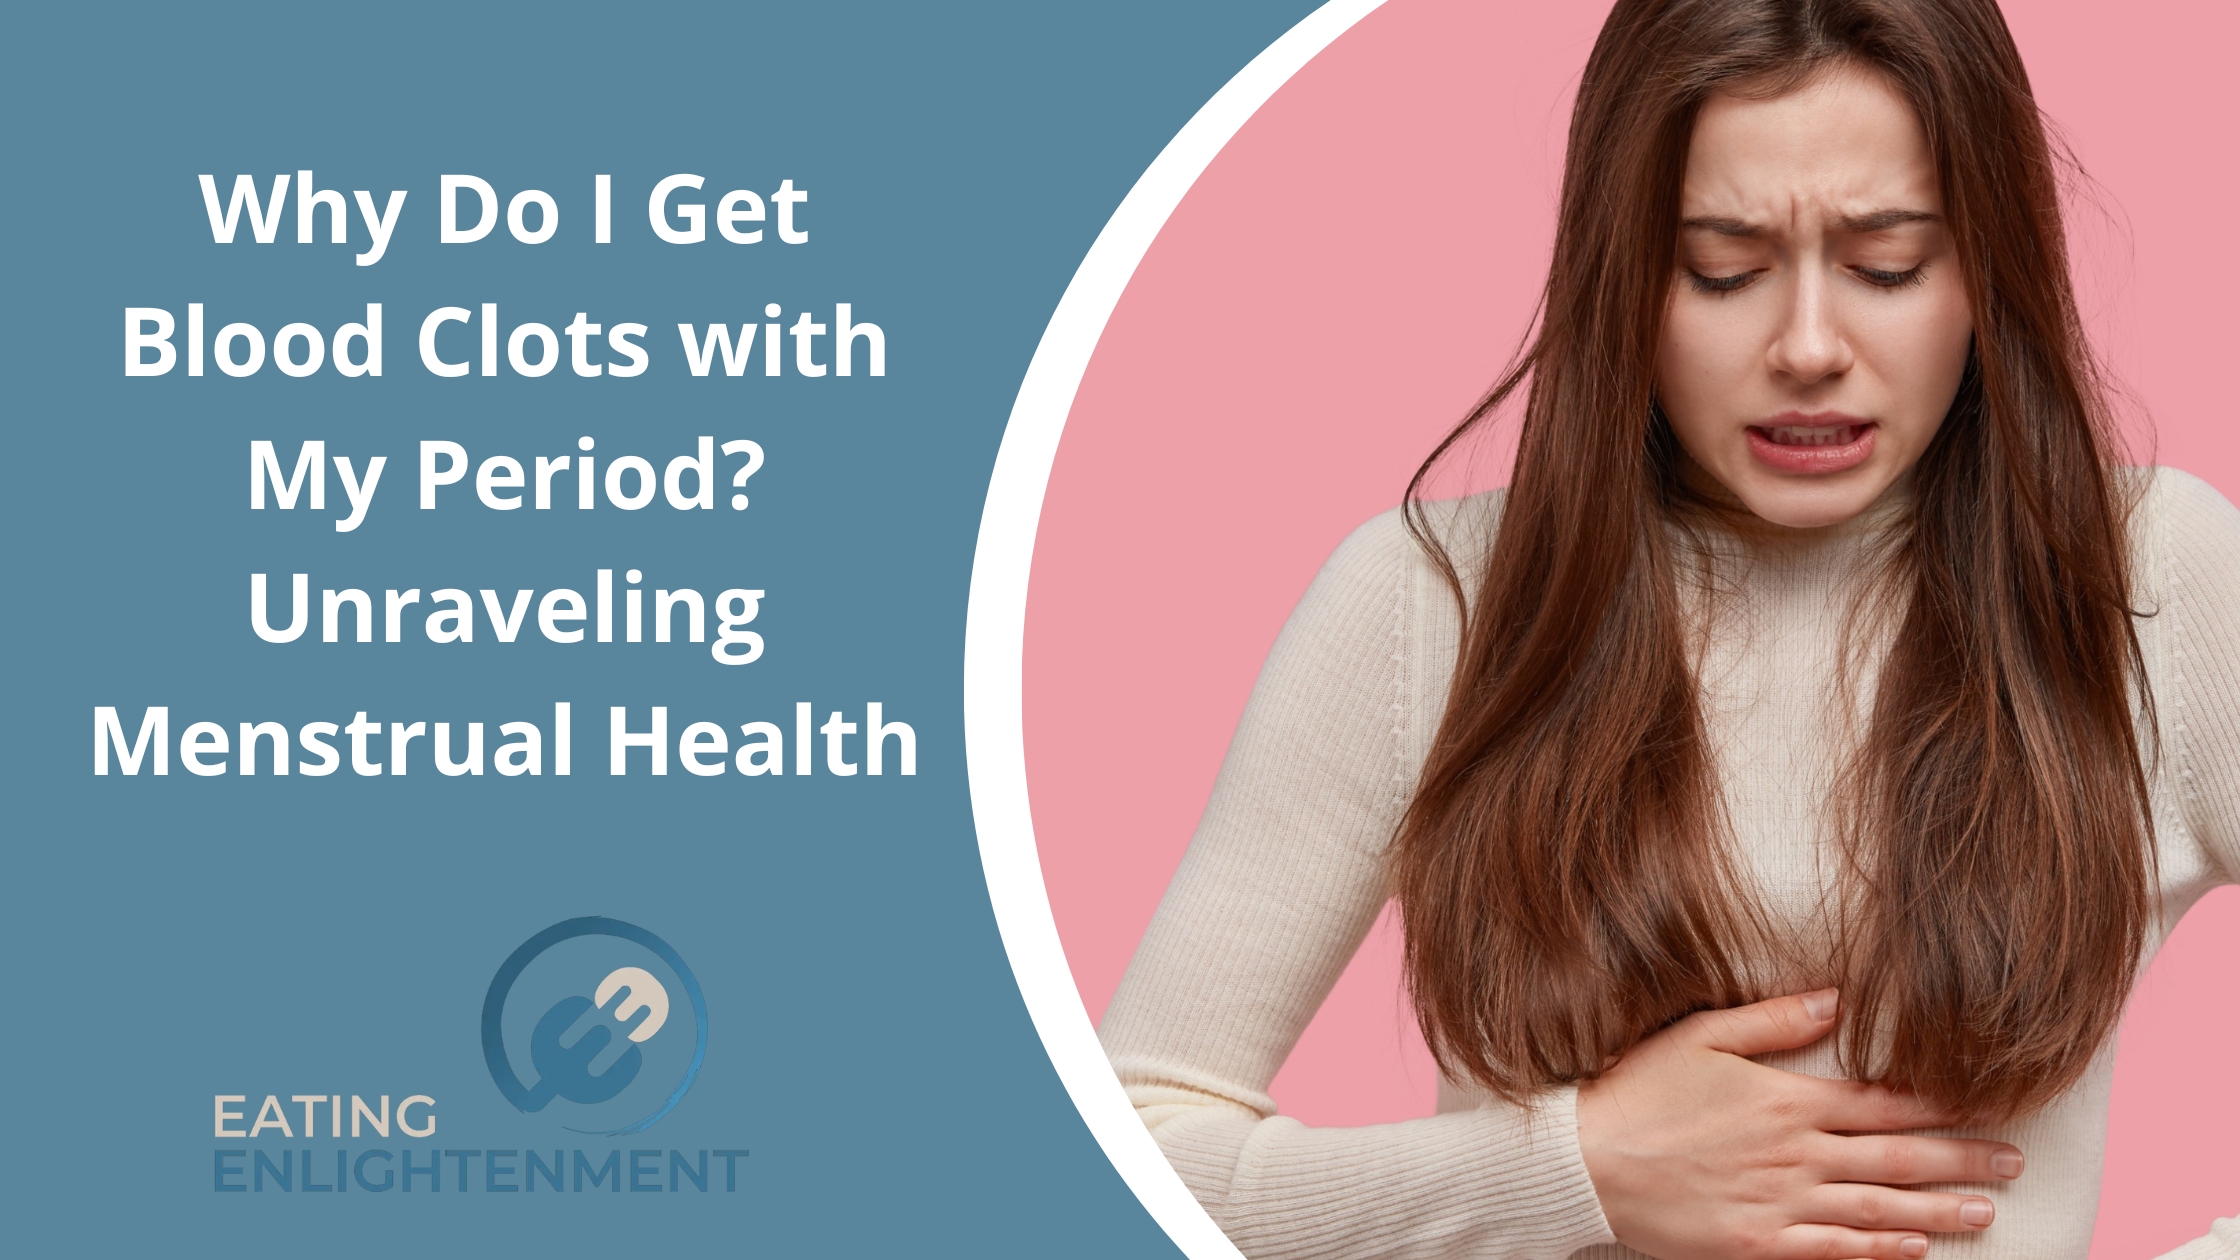 Why Do I Get Blood Clots with My Period? Unraveling Menstrual Health